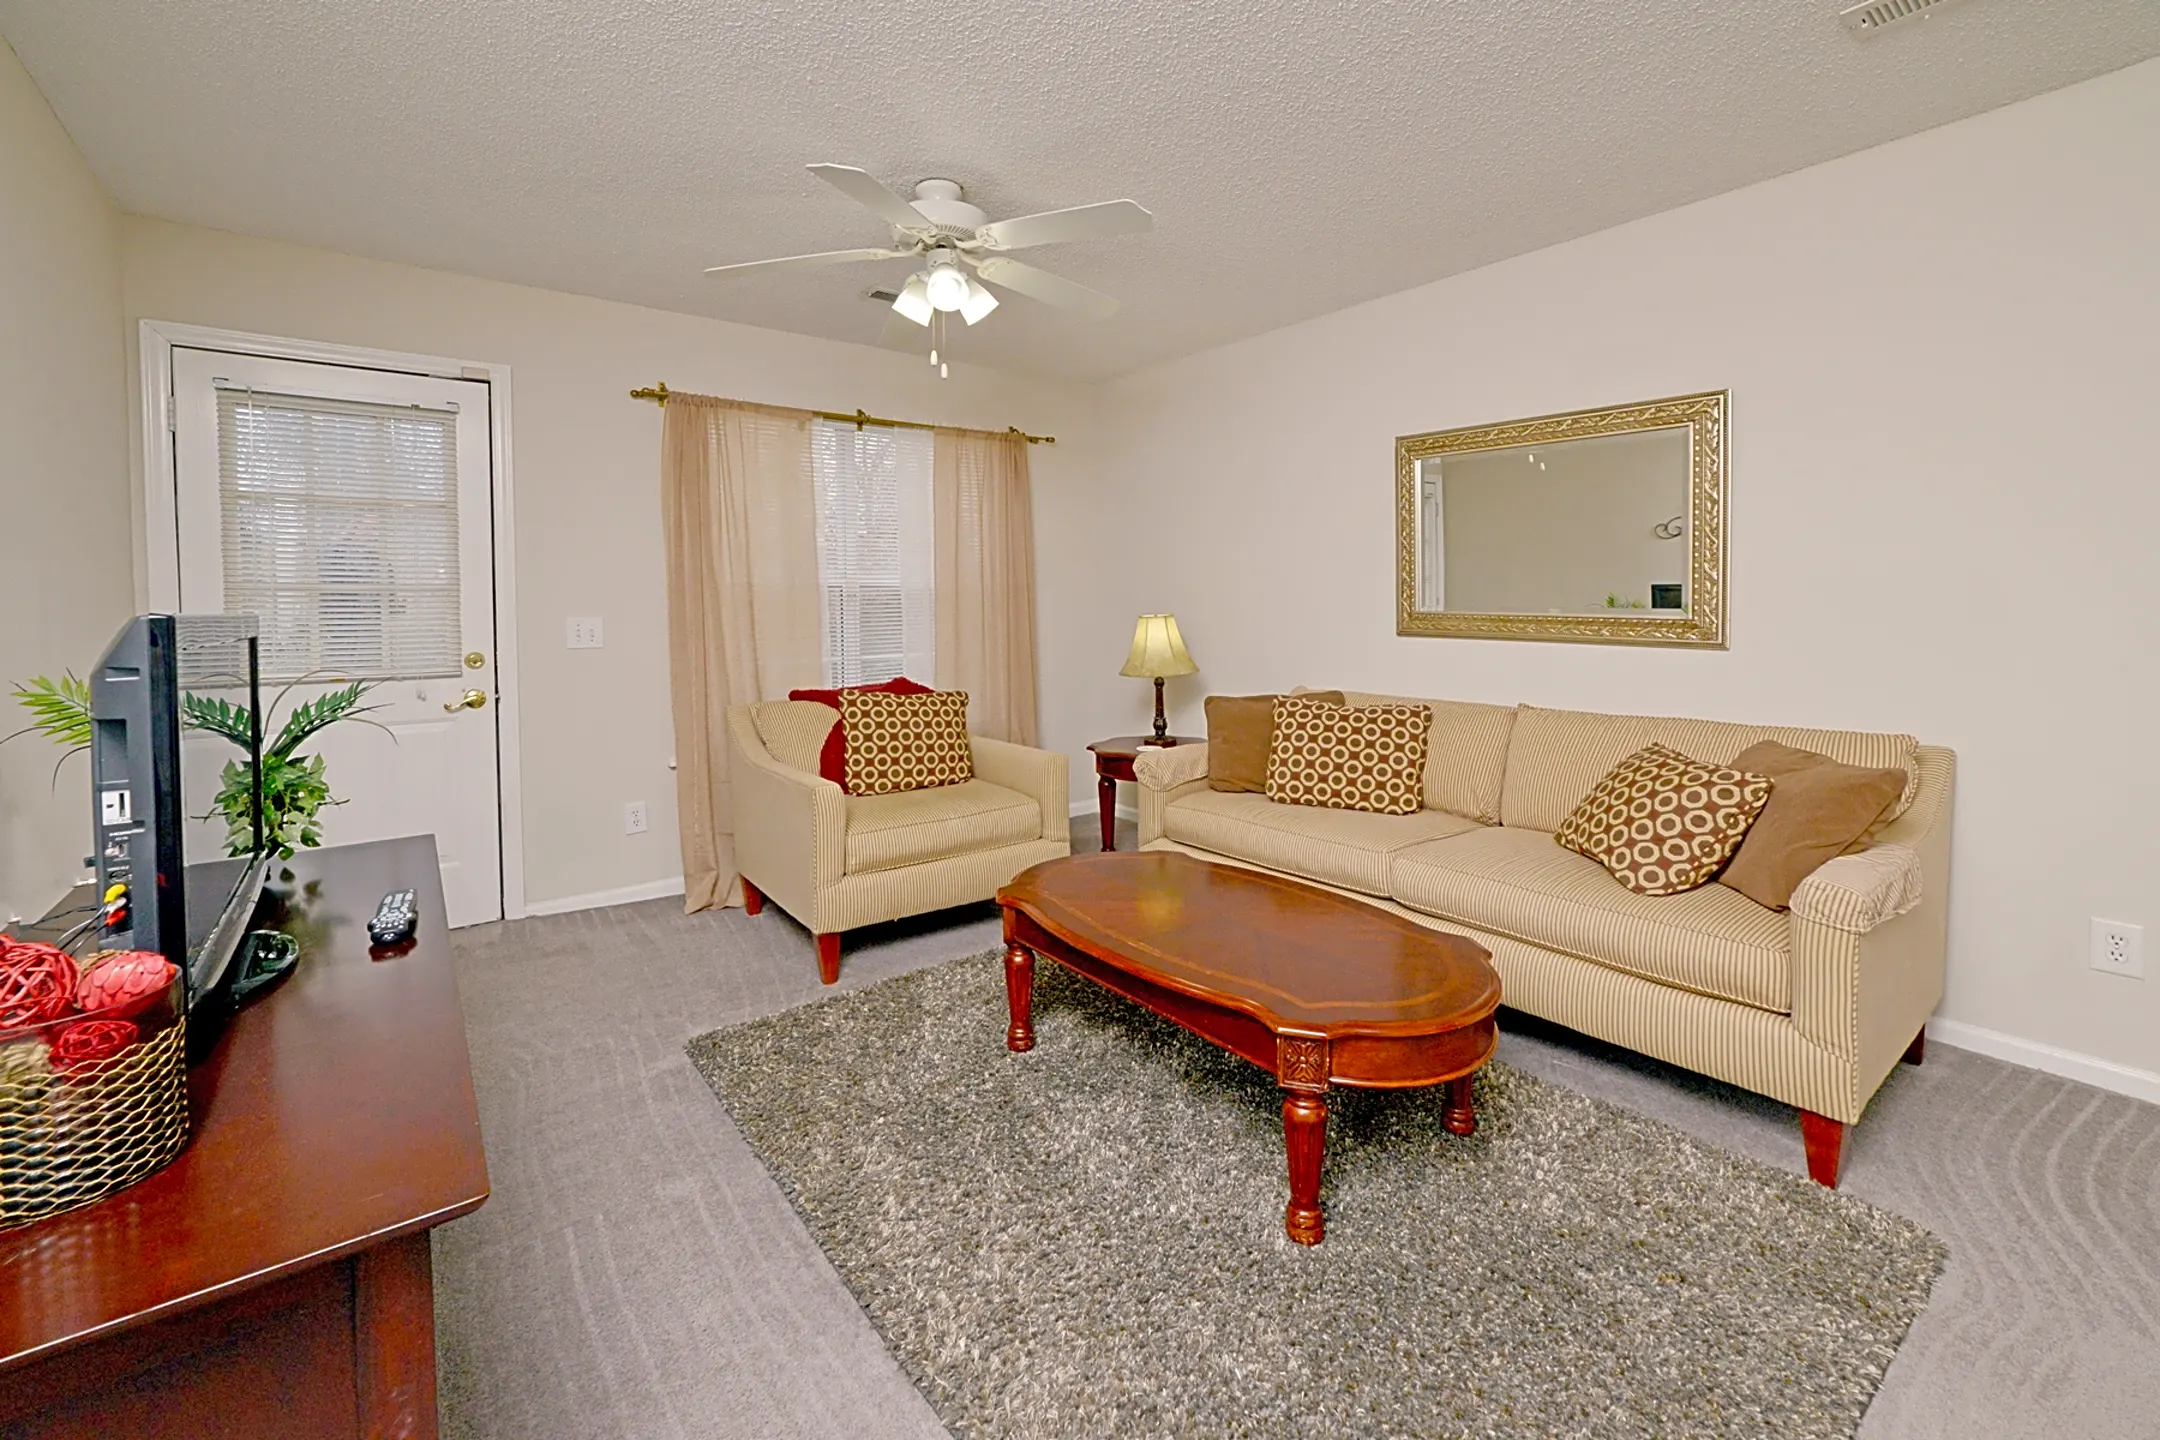 Living Room - Meridian Park Apartments - Greenville, NC